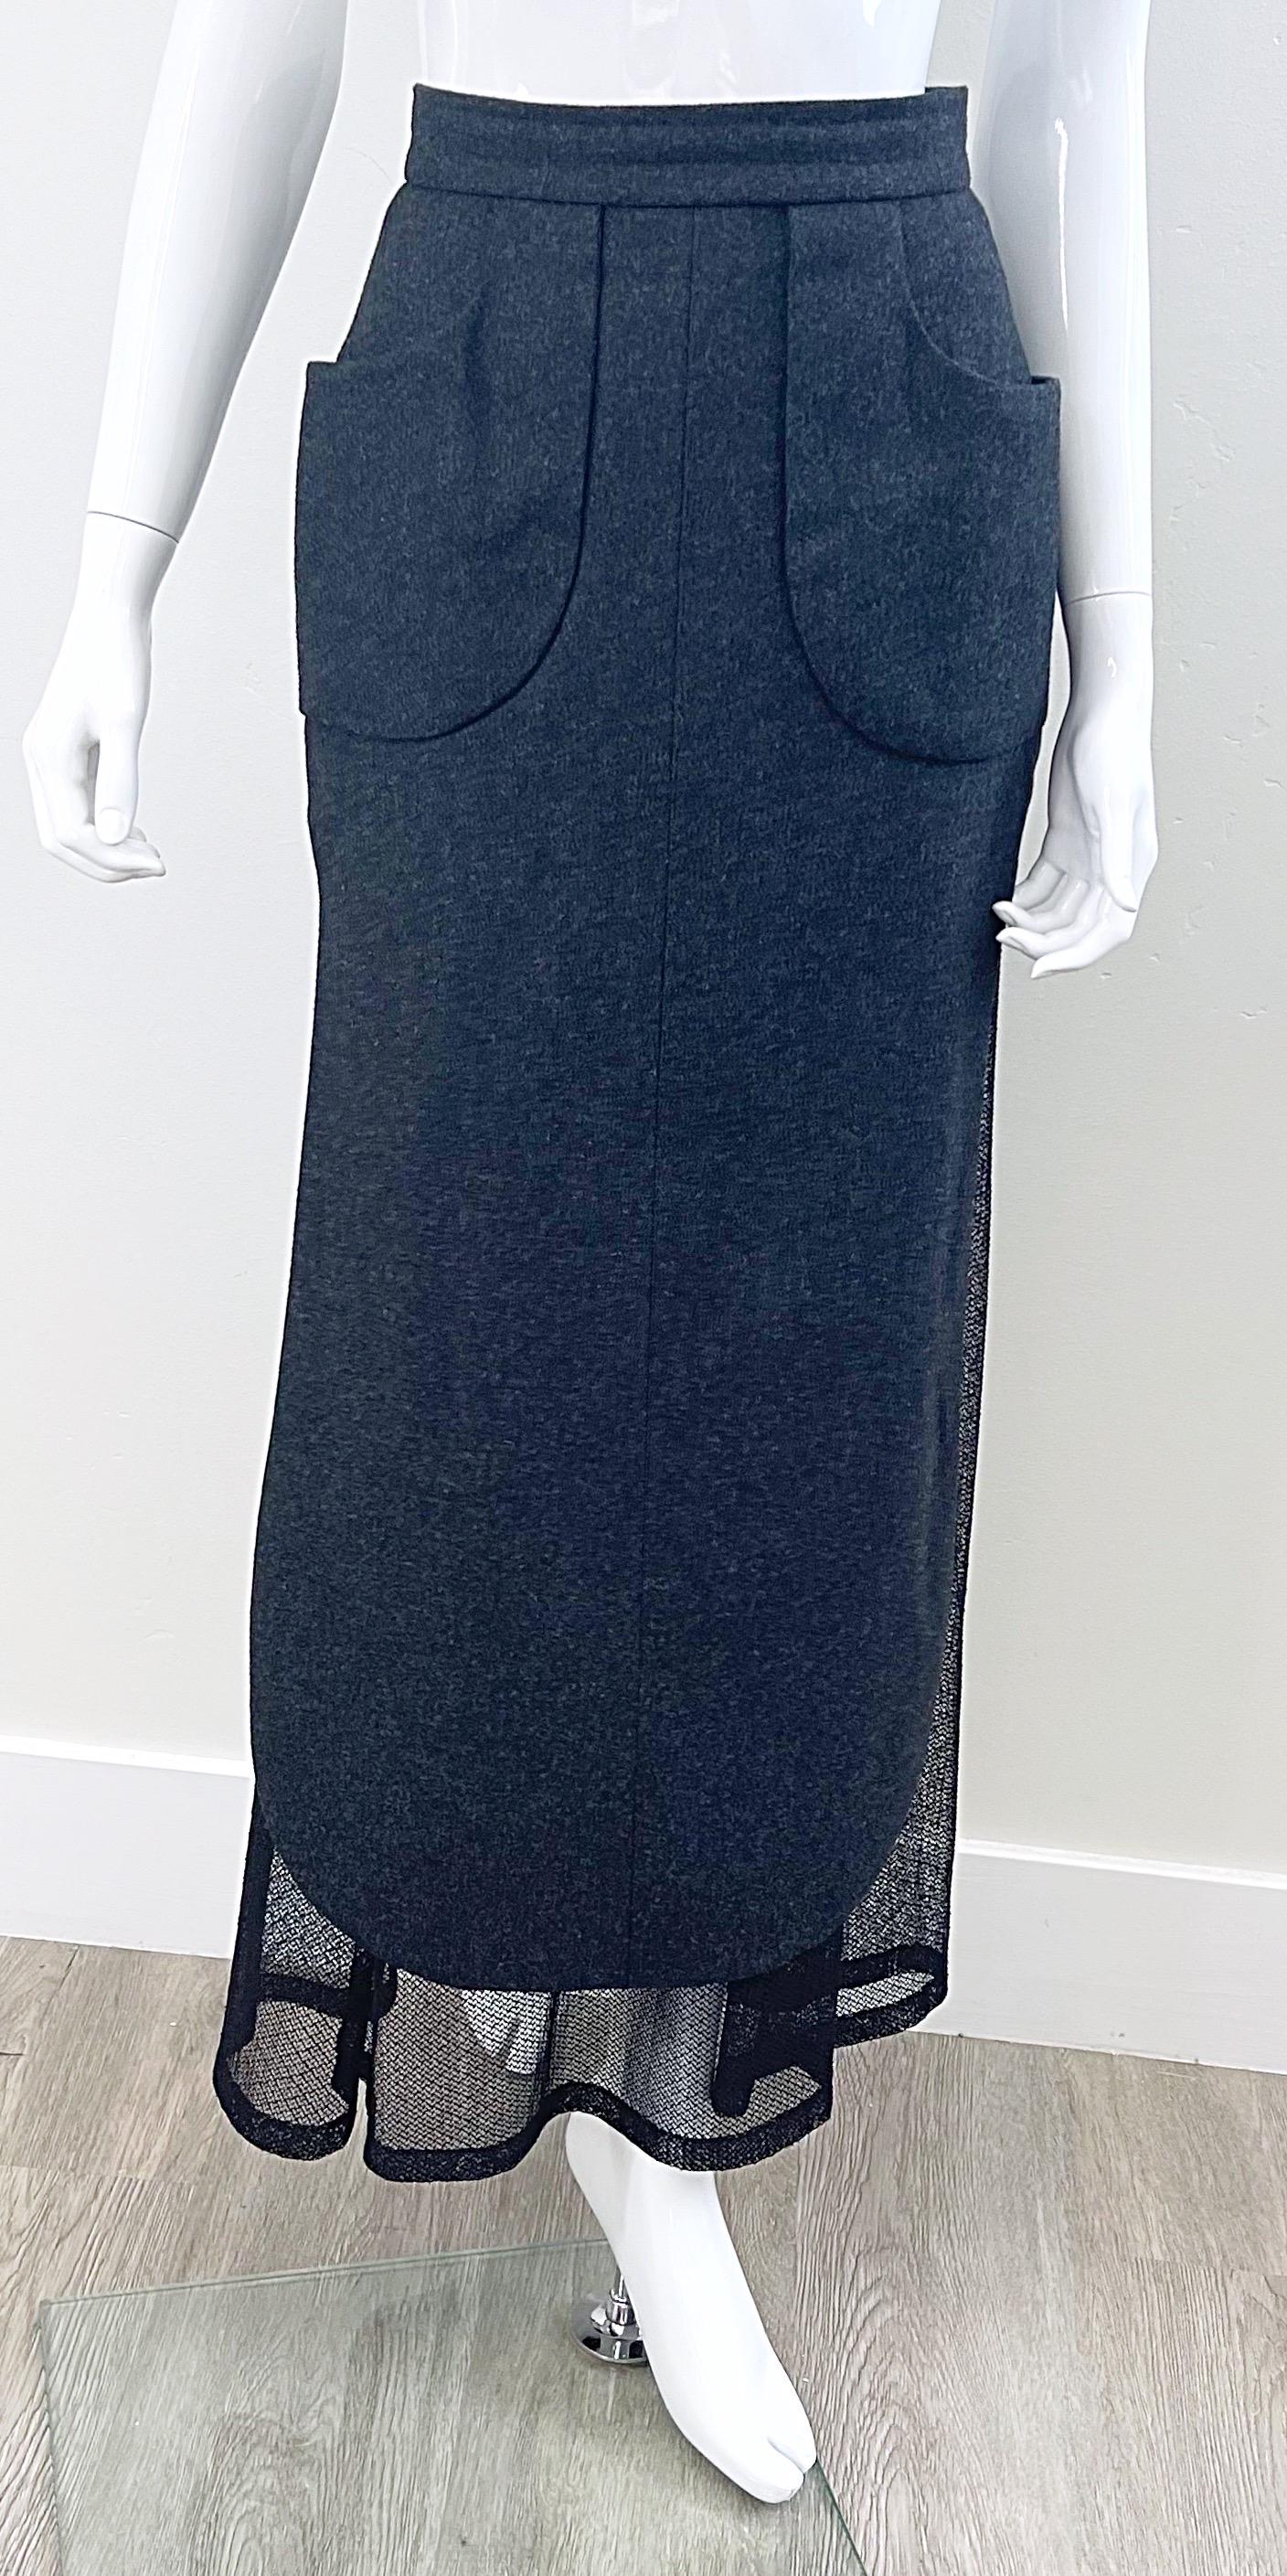 Karl Lagerfeld 1980s Grey Wool + Black Lace Vintage 80s Mini Maxi Skirt For Sale 10